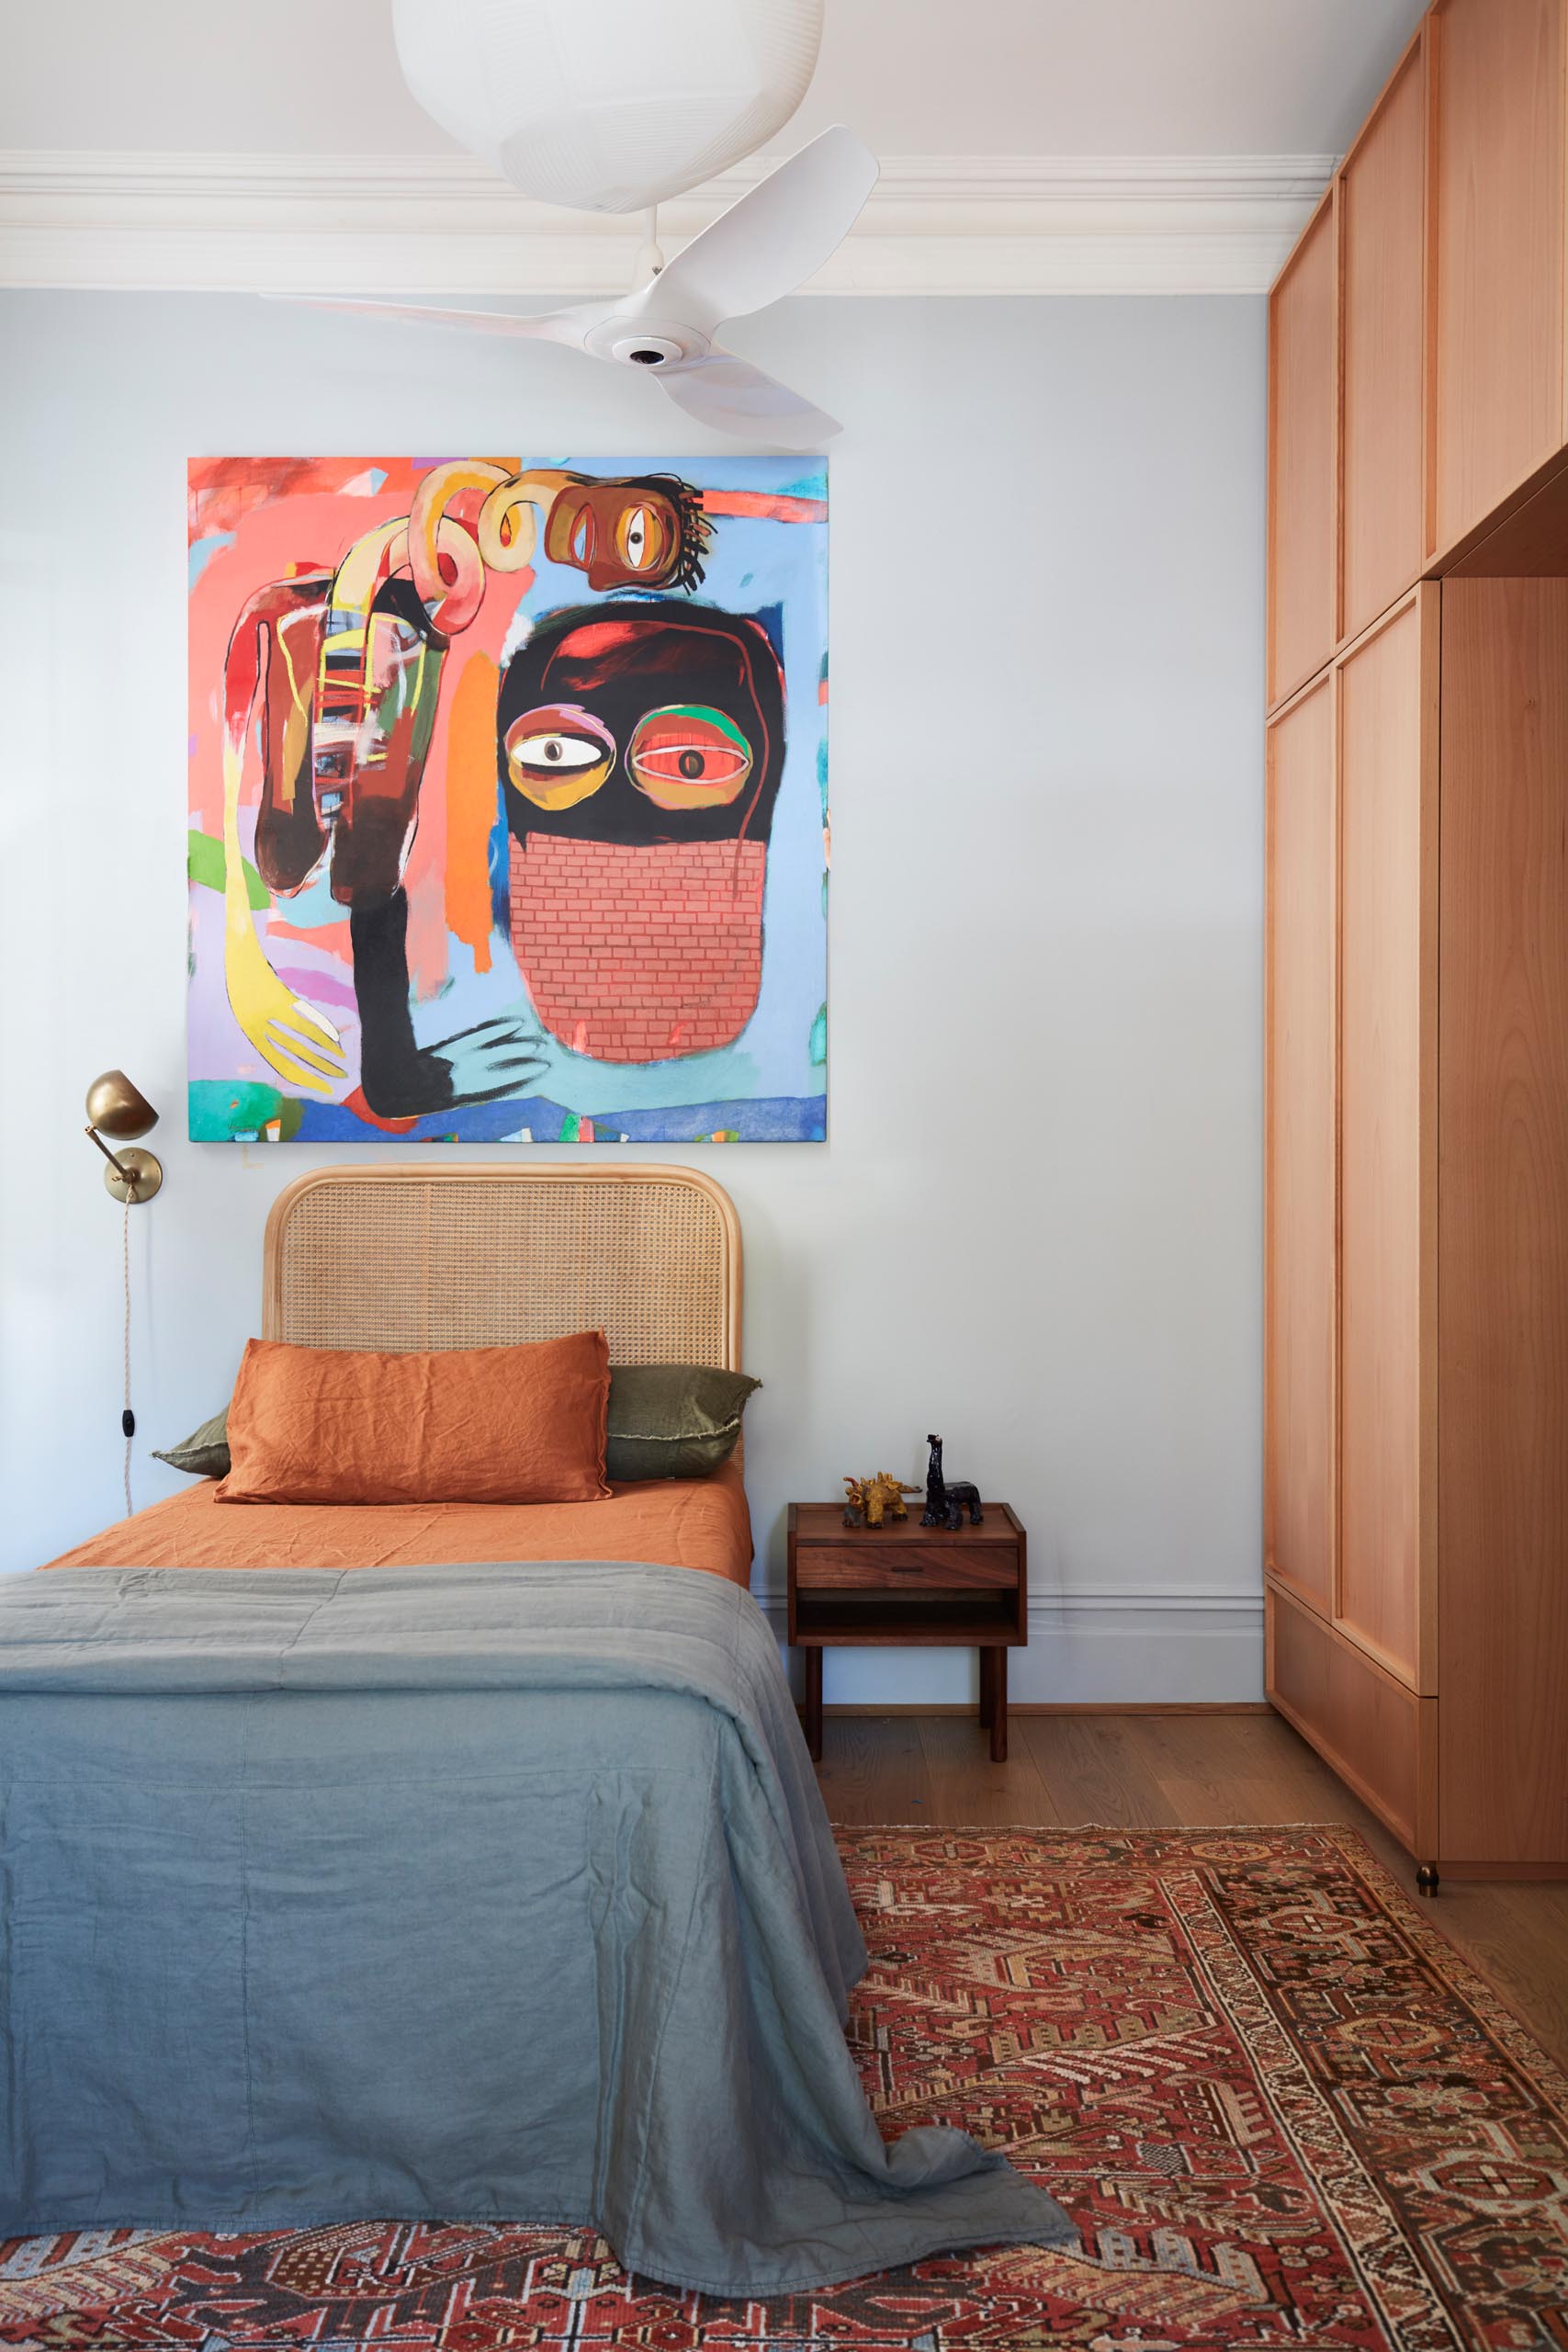 A bedroom with a bold and colorful art piece above the bed.